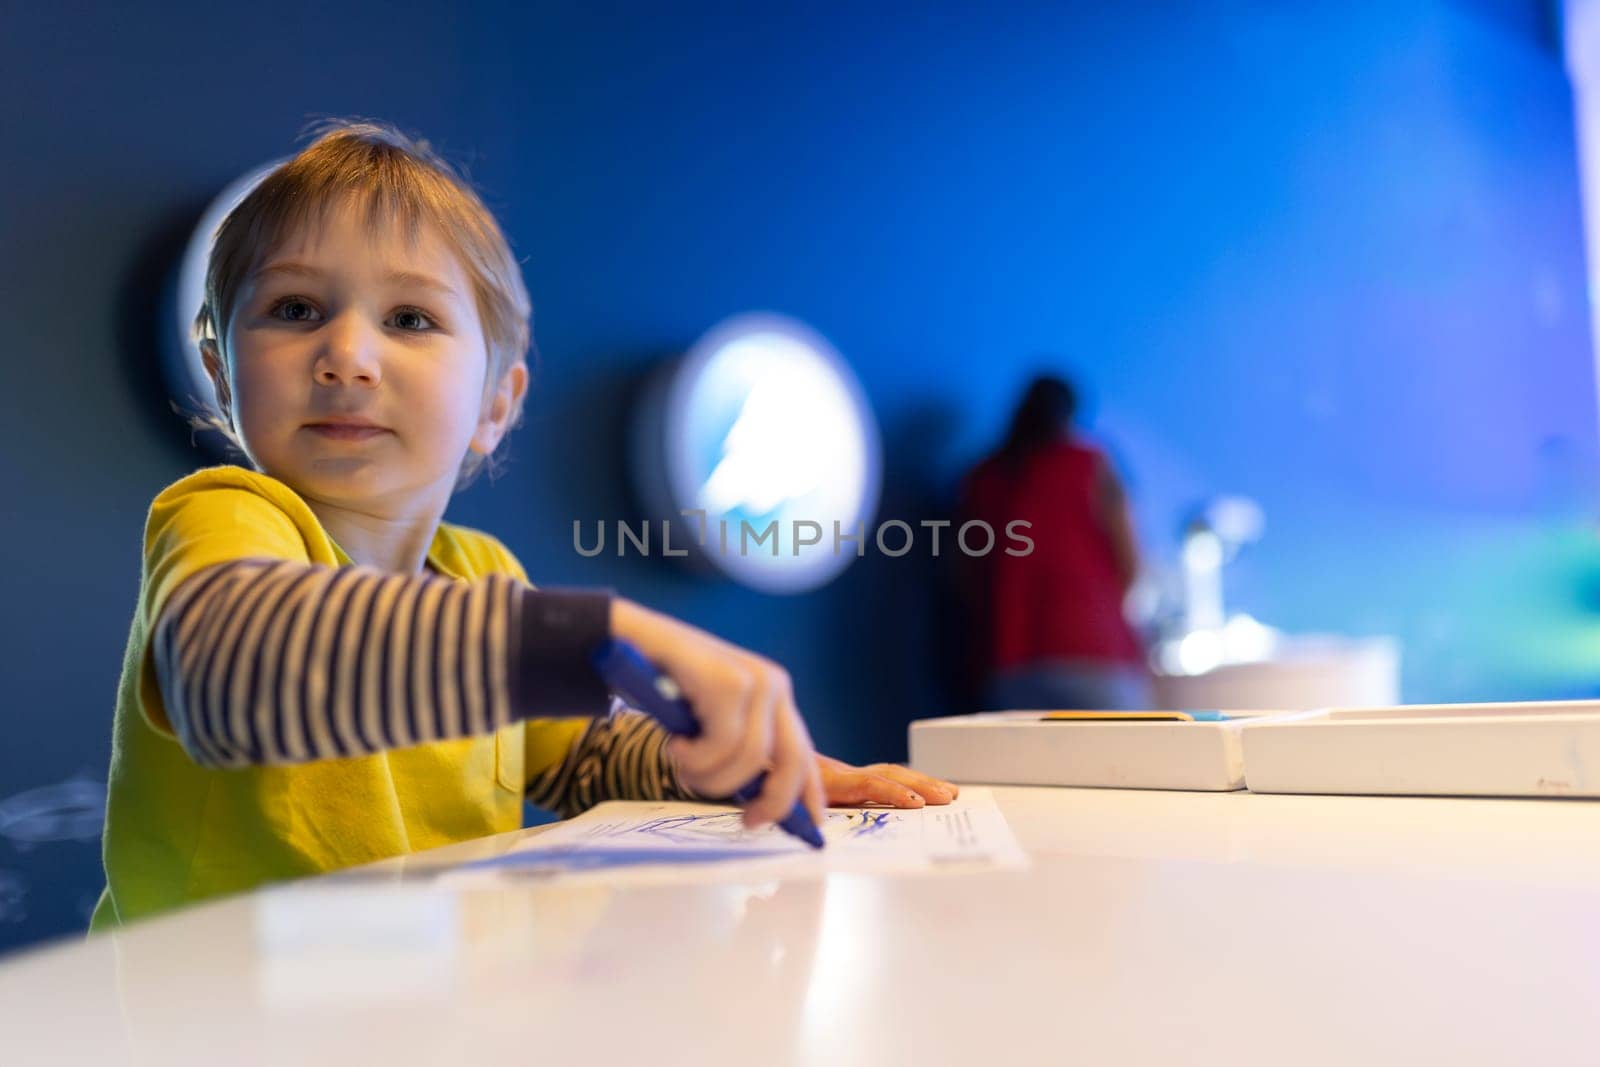 A young boy is sitting at a table with a blue marker in his hand. He is looking at a piece of paper and seems to be drawing or writing something. Concept of creativity and focus